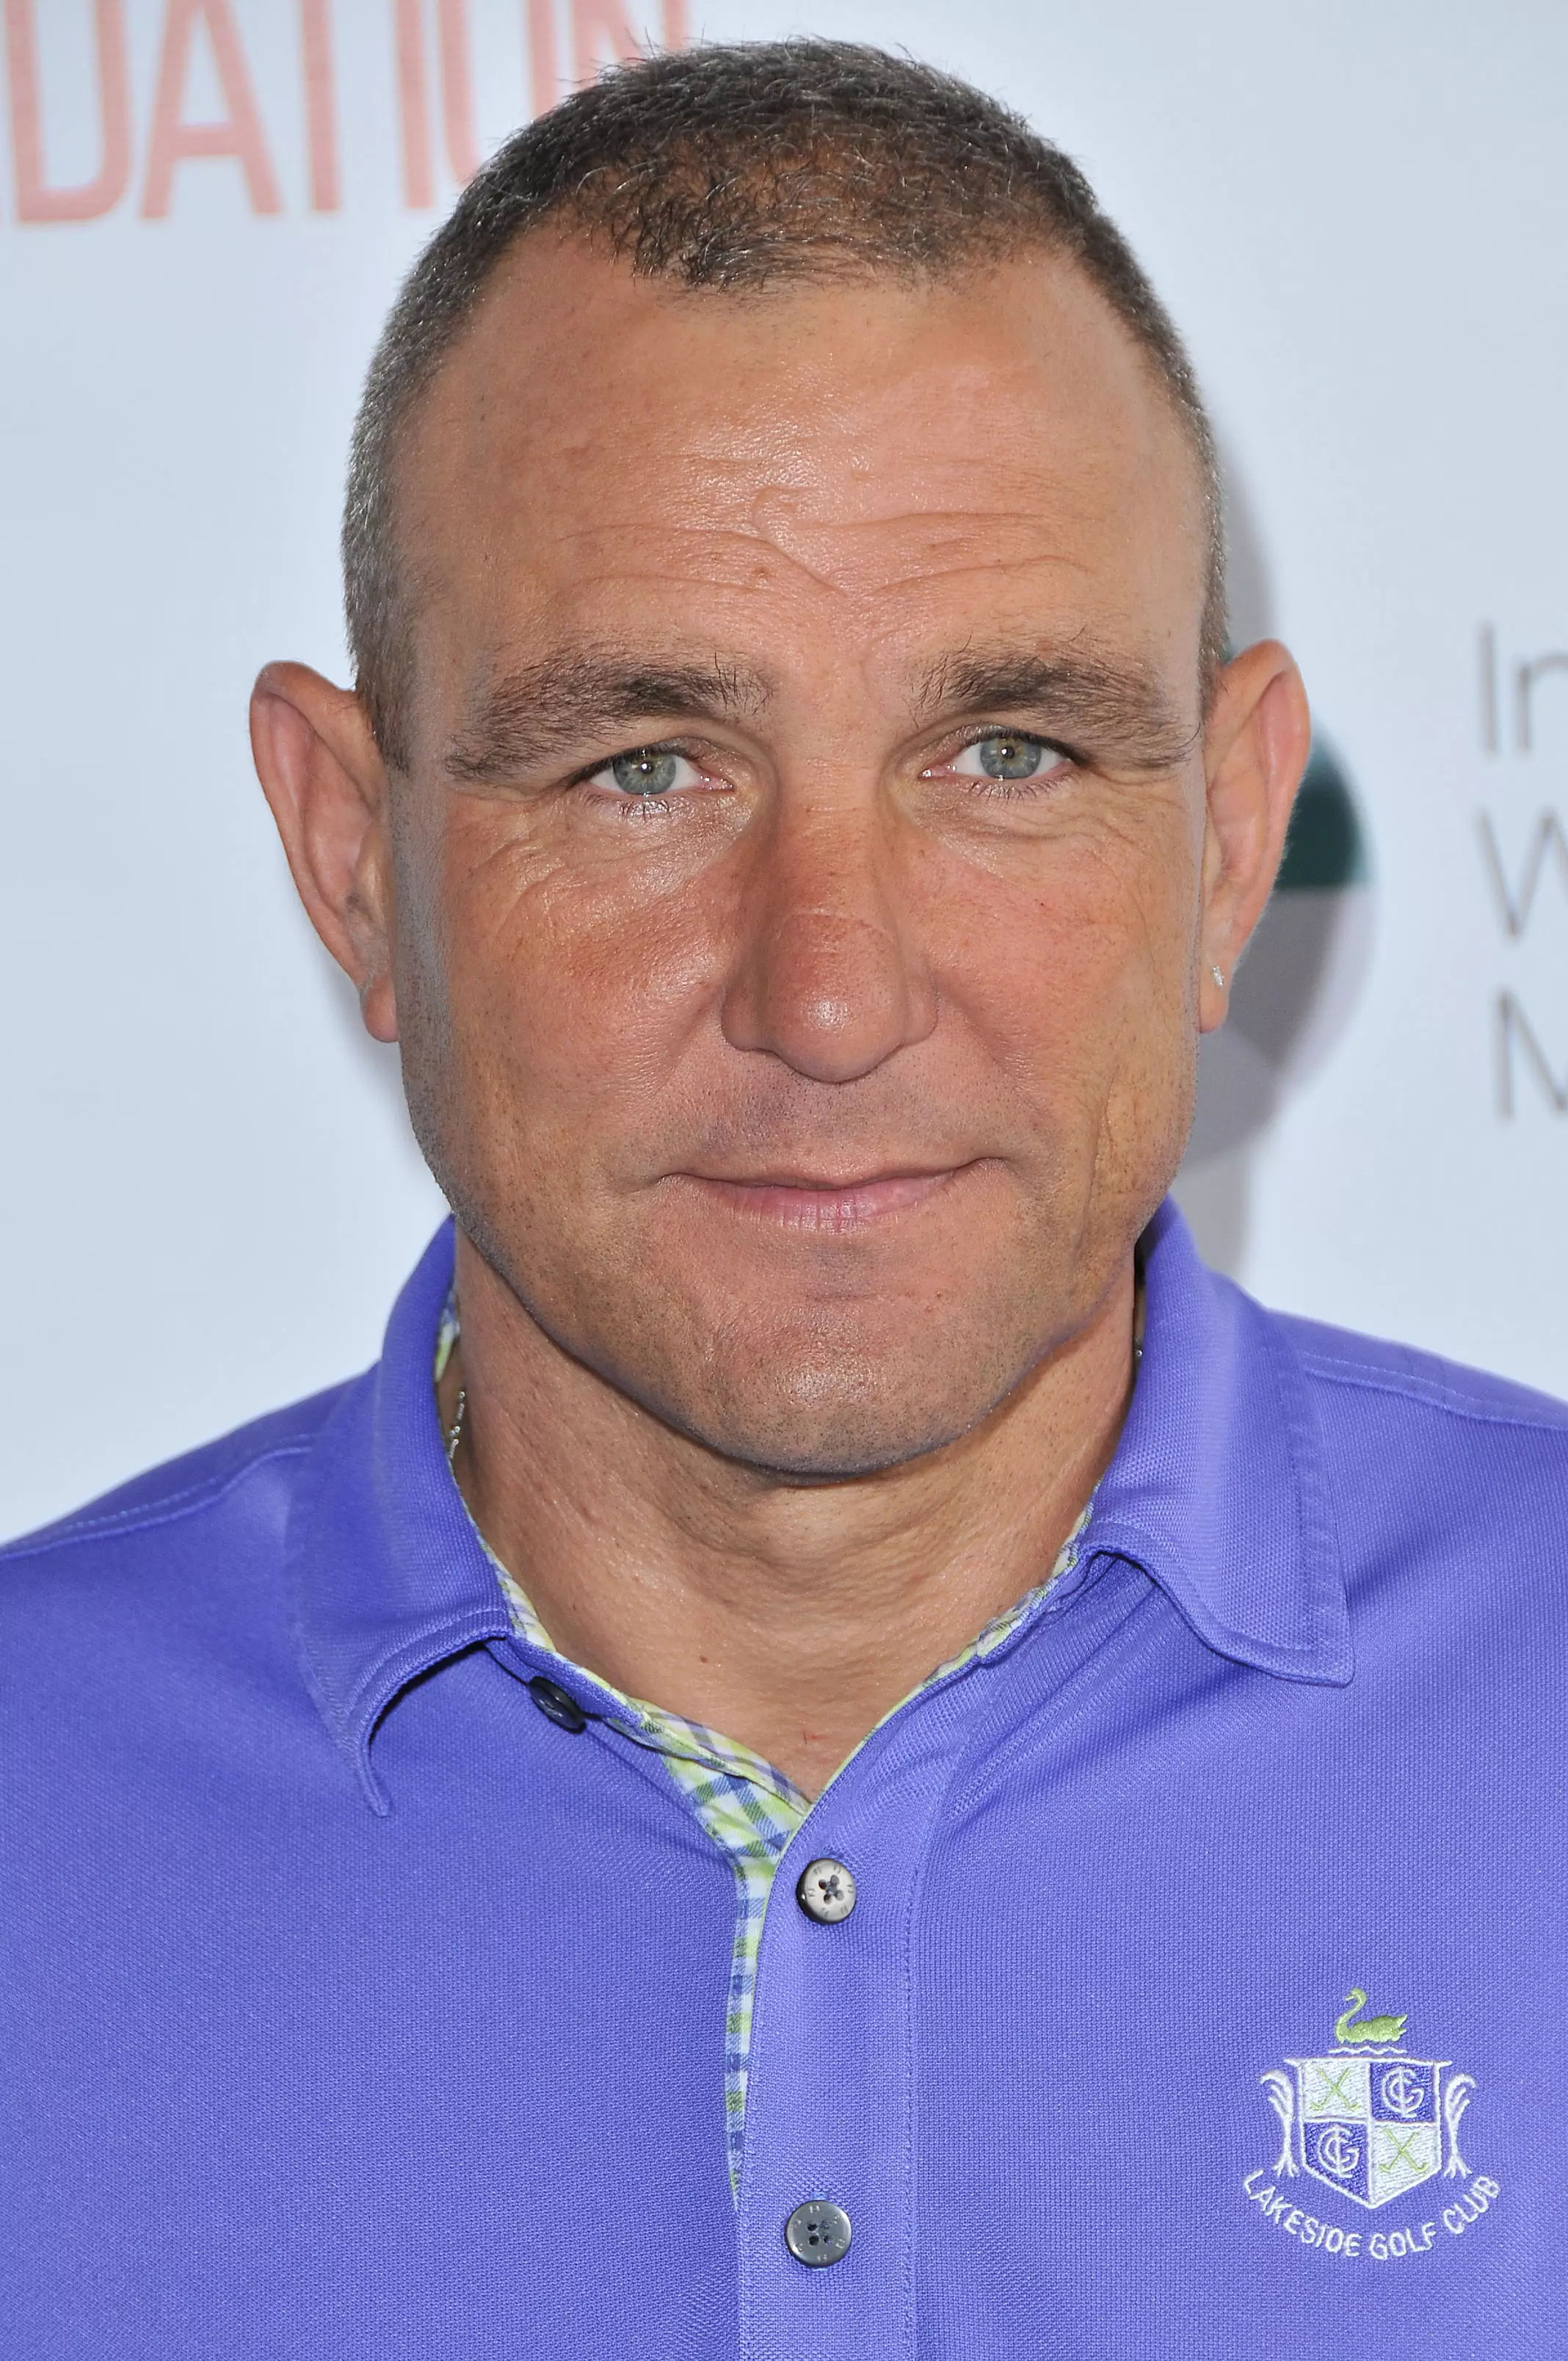 Vinnie Jones says he has cried almost every night since his wife's death.